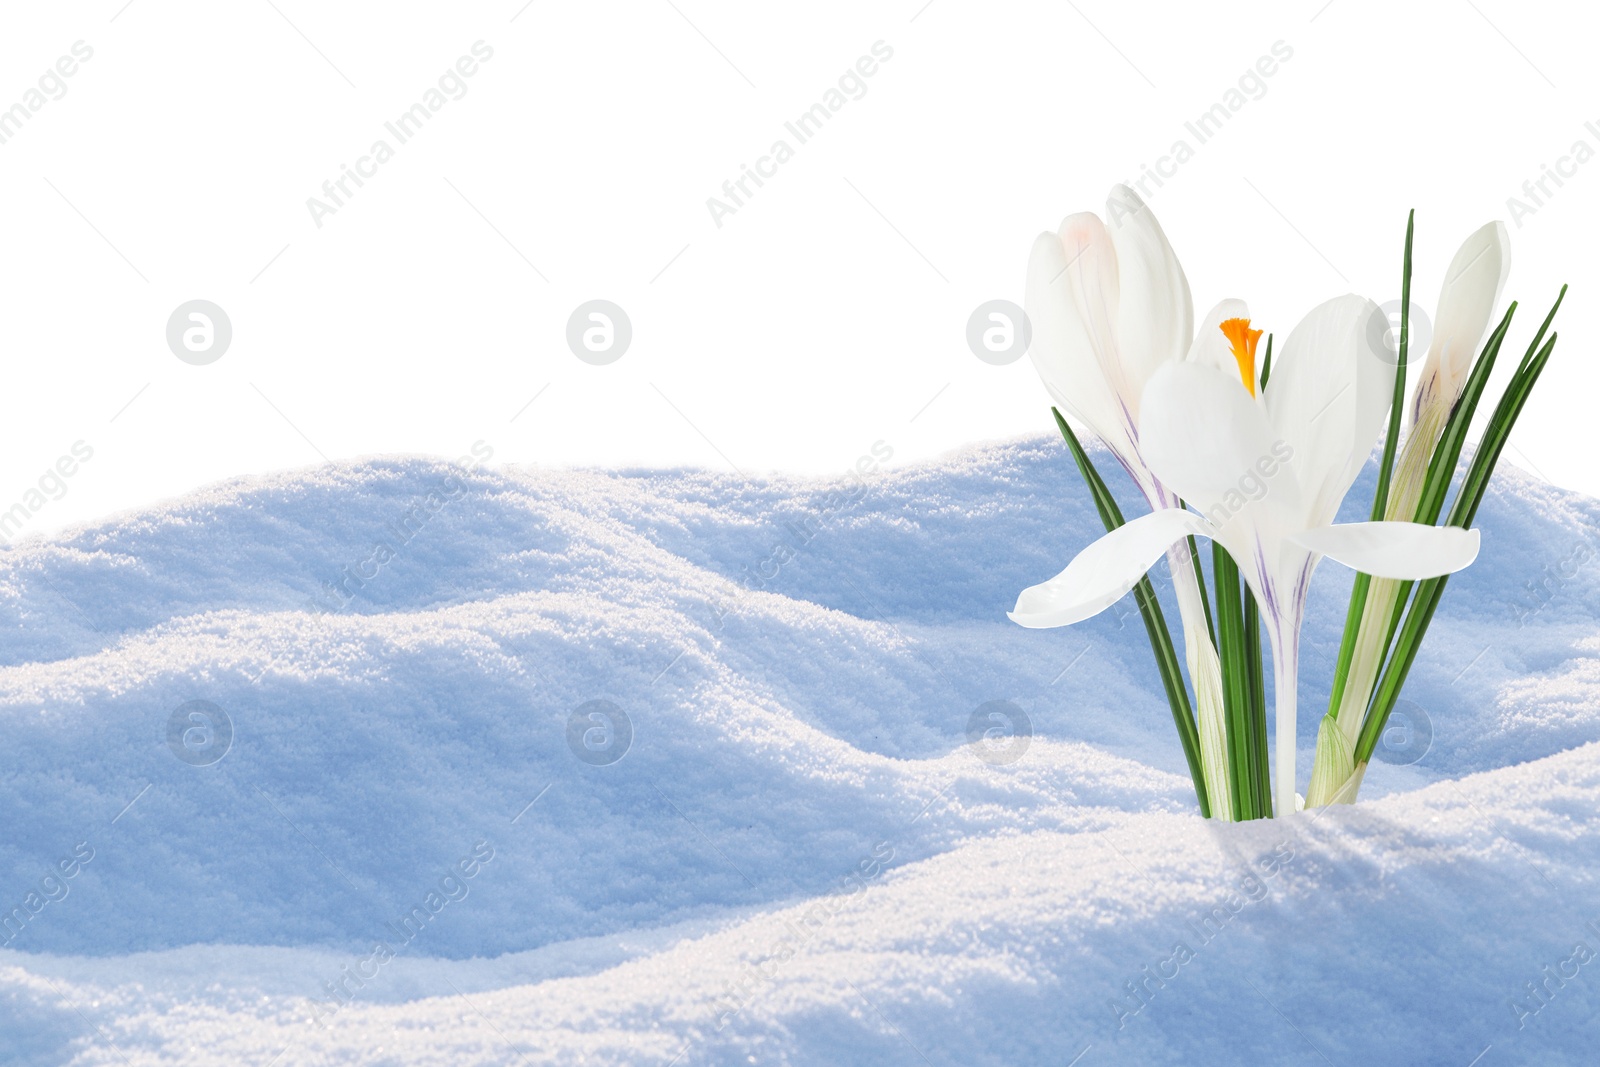 Image of Beautiful spring crocus flowers growing through snow, space for text